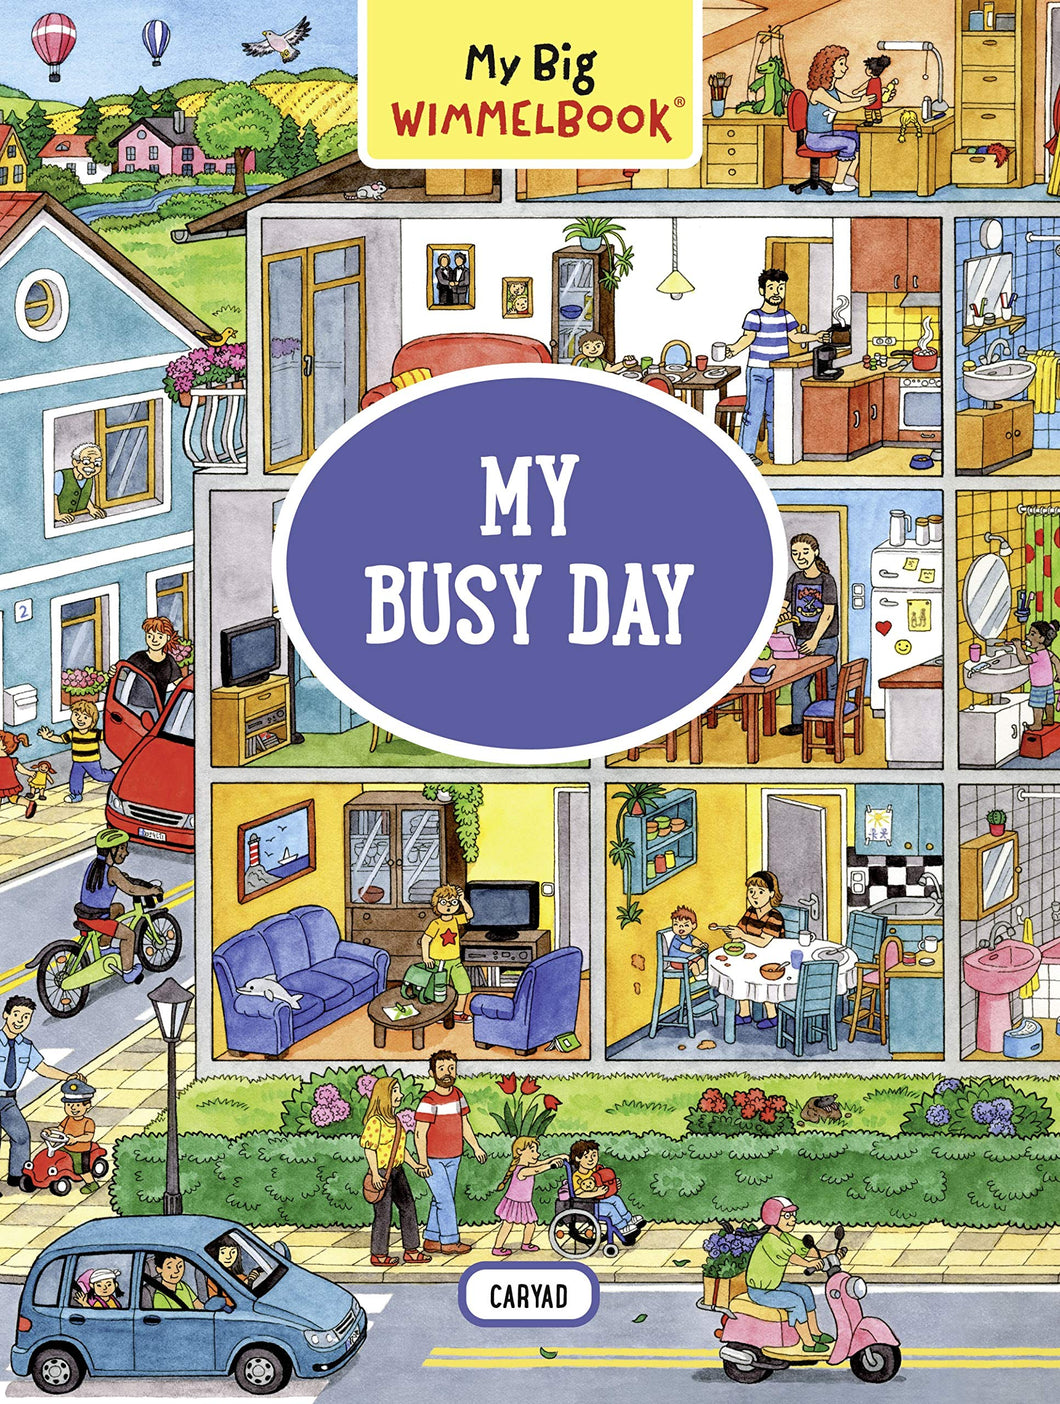 My Big Wimmelbook―My Busy Day